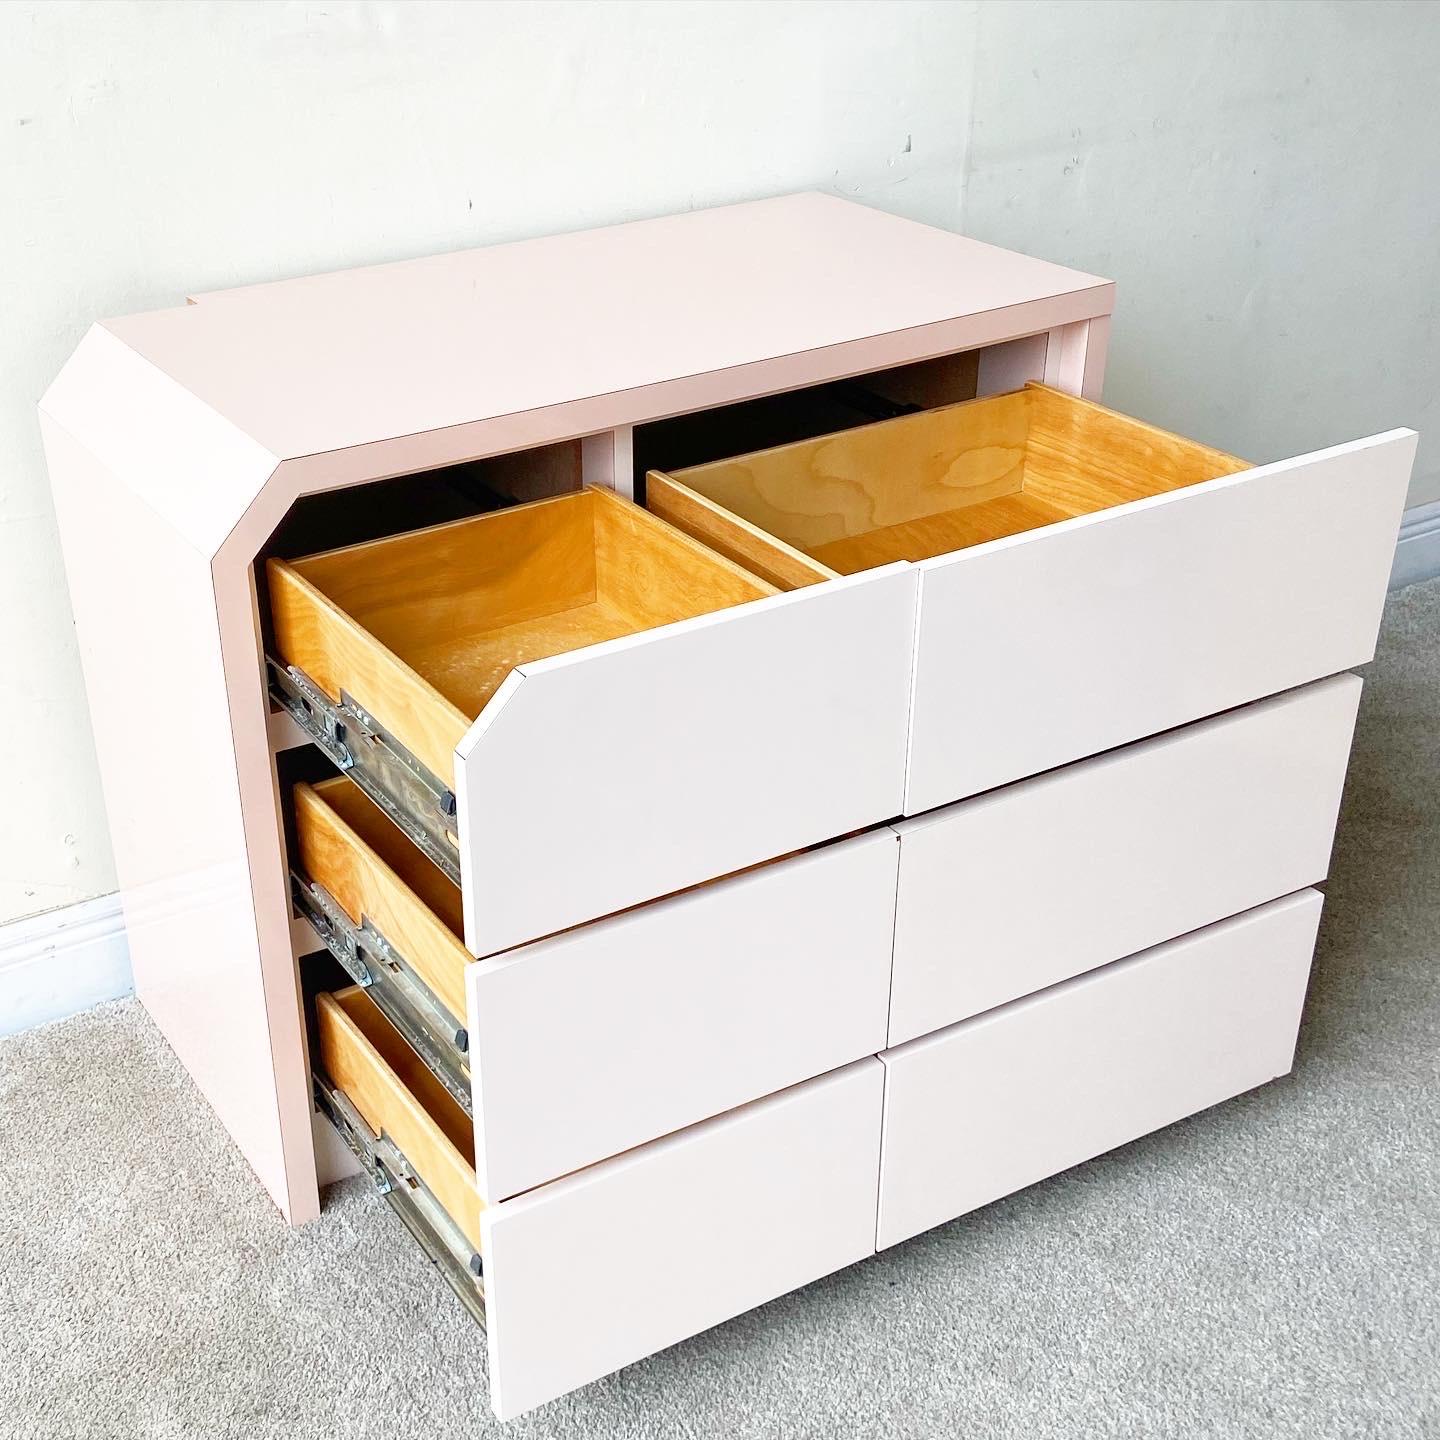 Exceptional 1980s postmodern dresser with 6 drawers. Features a pink and light pink lacquer laminate.

Additional information:
Material: Wood
Color: Pink
Style: Postmodern
Time Period: 1980s
Place of origin: USA
Dimension: 37.5